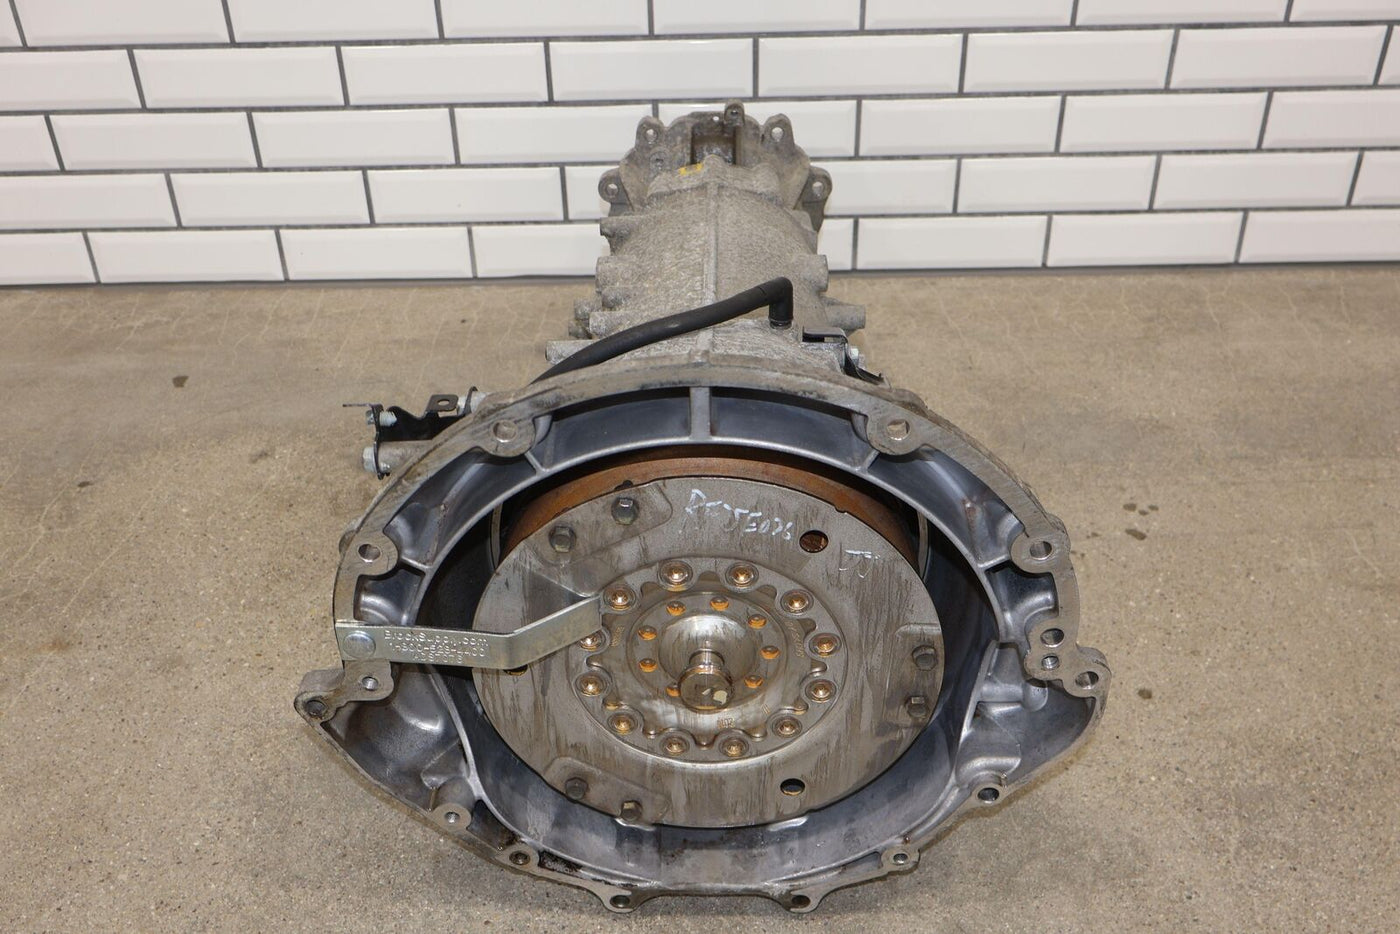 14-17 Jeep Grand Cherokee SRT8 4x4 Automatic Transmission (Unable To Test) 96K